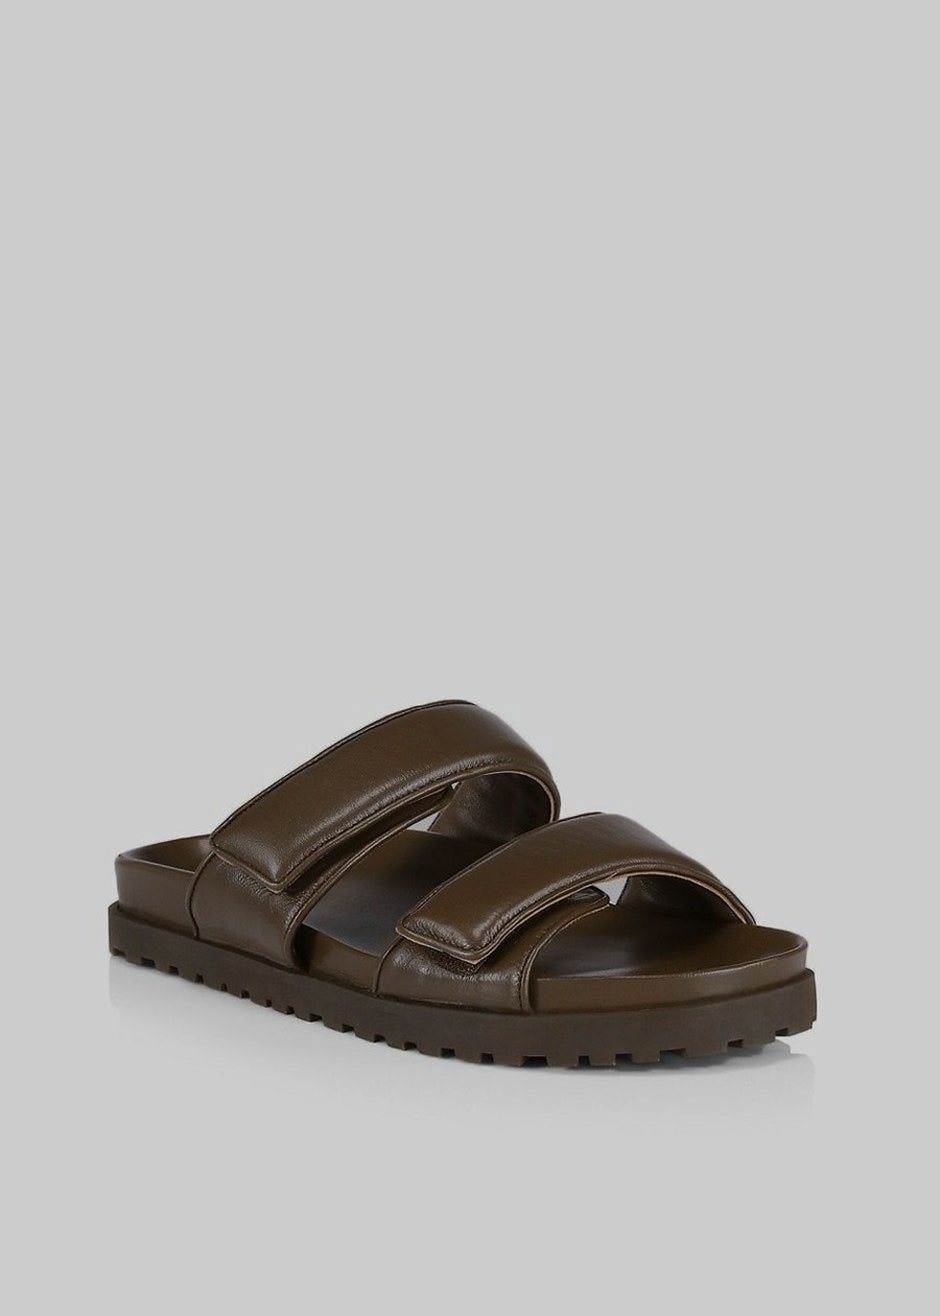 GIA x Pernille Leather Slide Sandals - Brown - 3